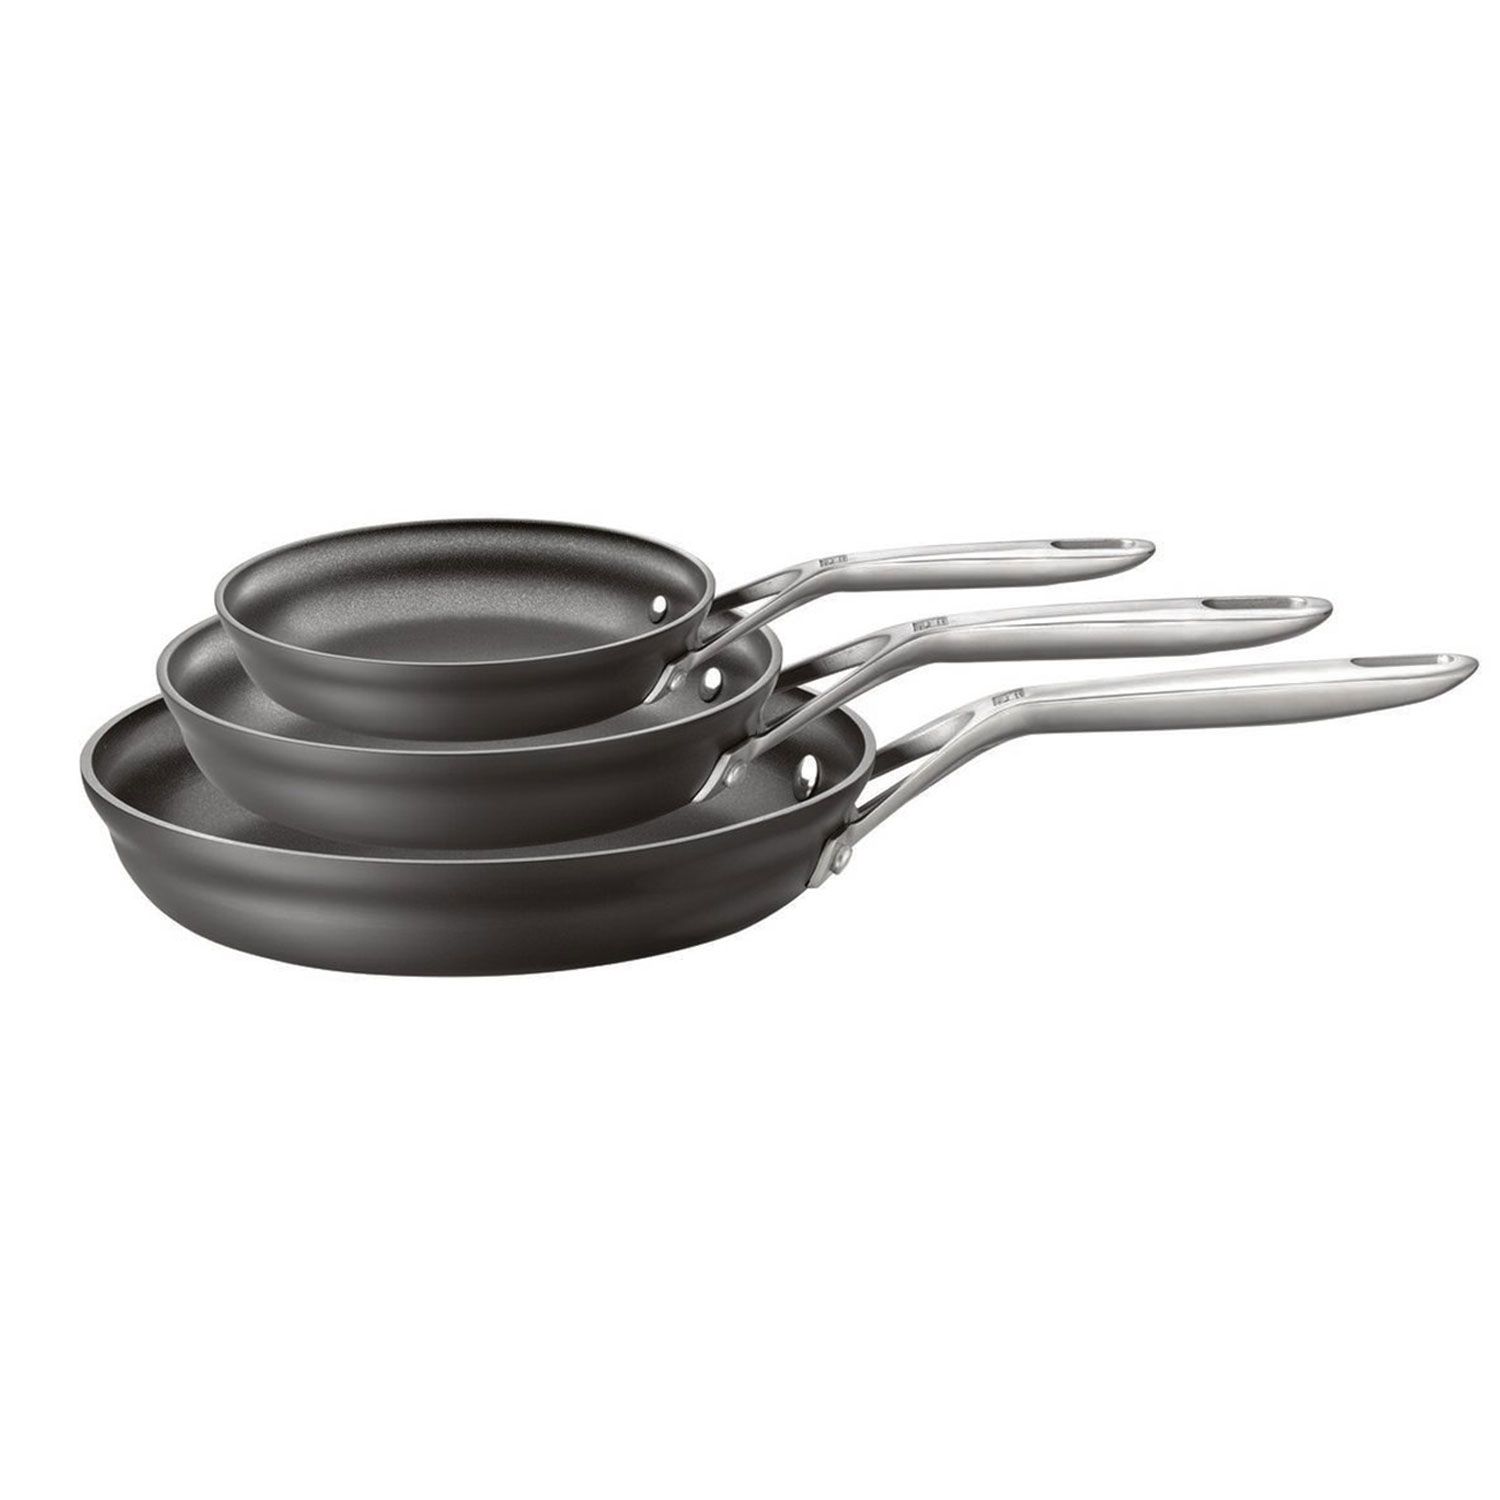 Zwilling cookware